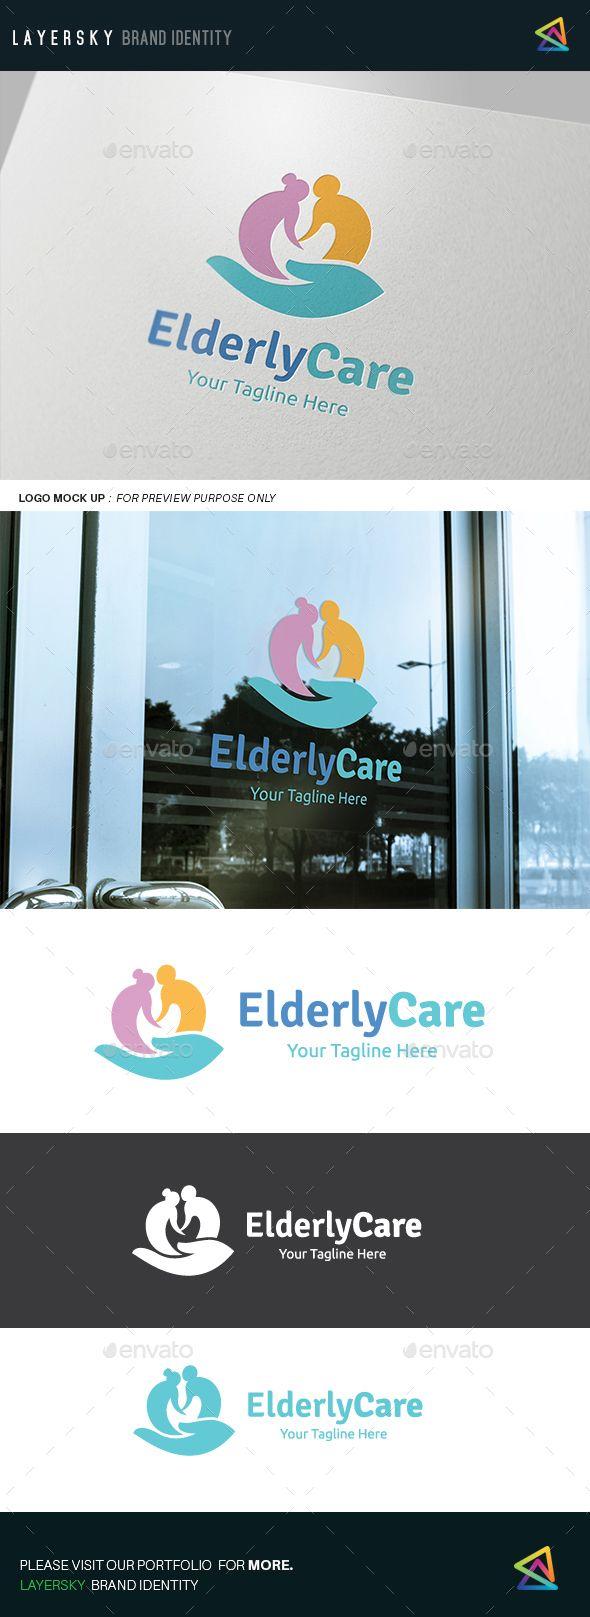 Elderly Care Logo - Pin by best Graphic Design on Logo Templates | Logos, Care logo ...